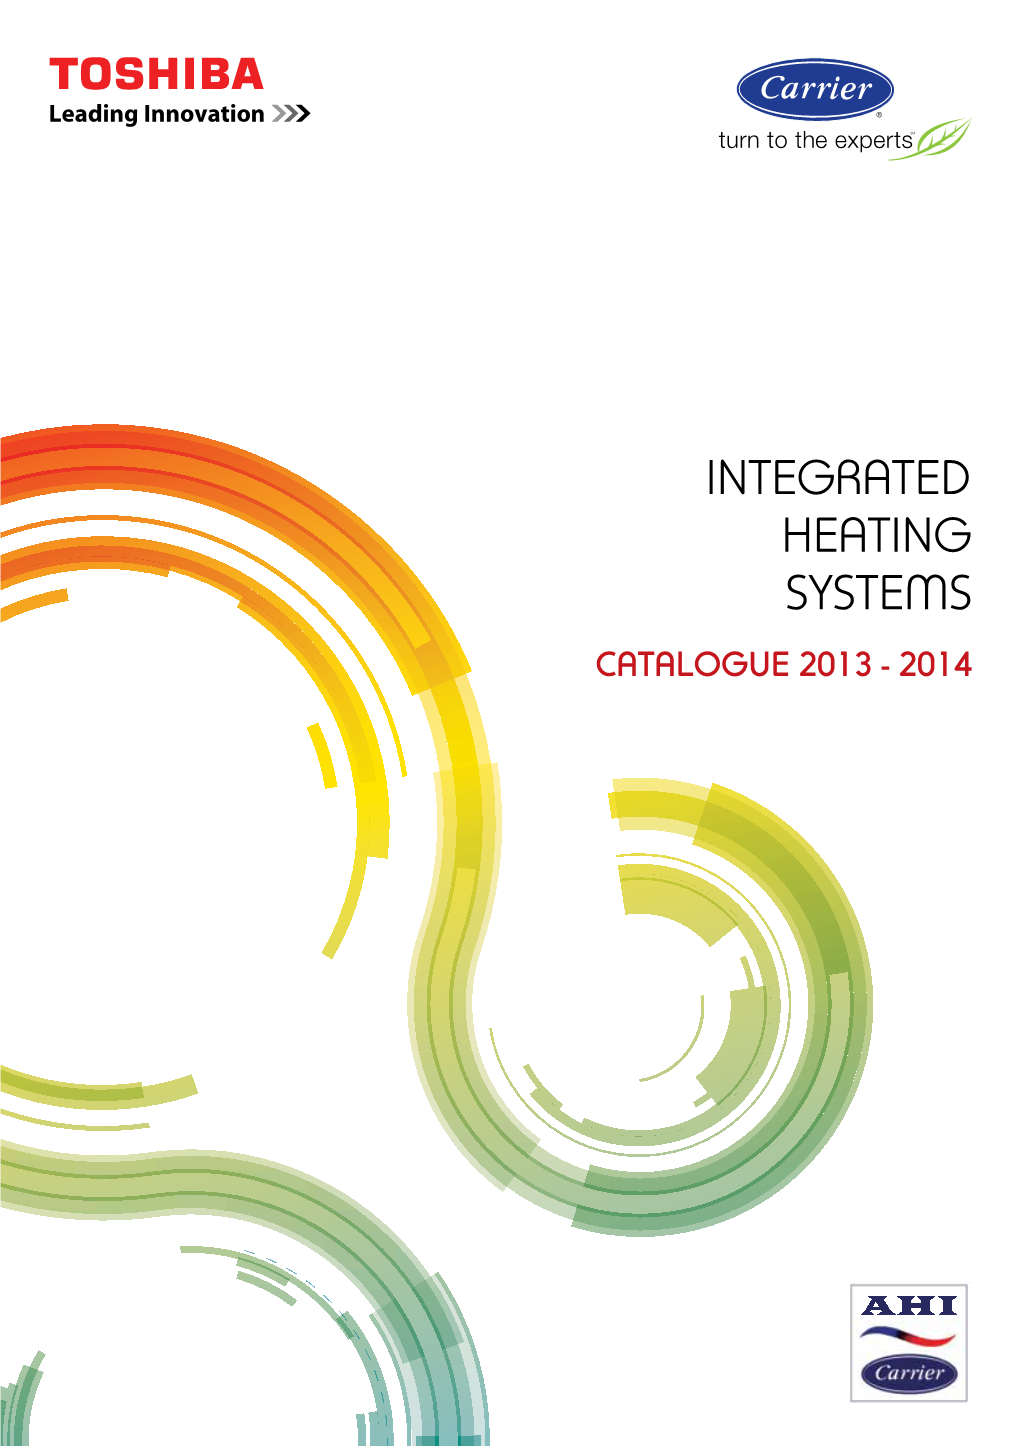 Integrated Heating Systems Catalogue 2013 - 2014